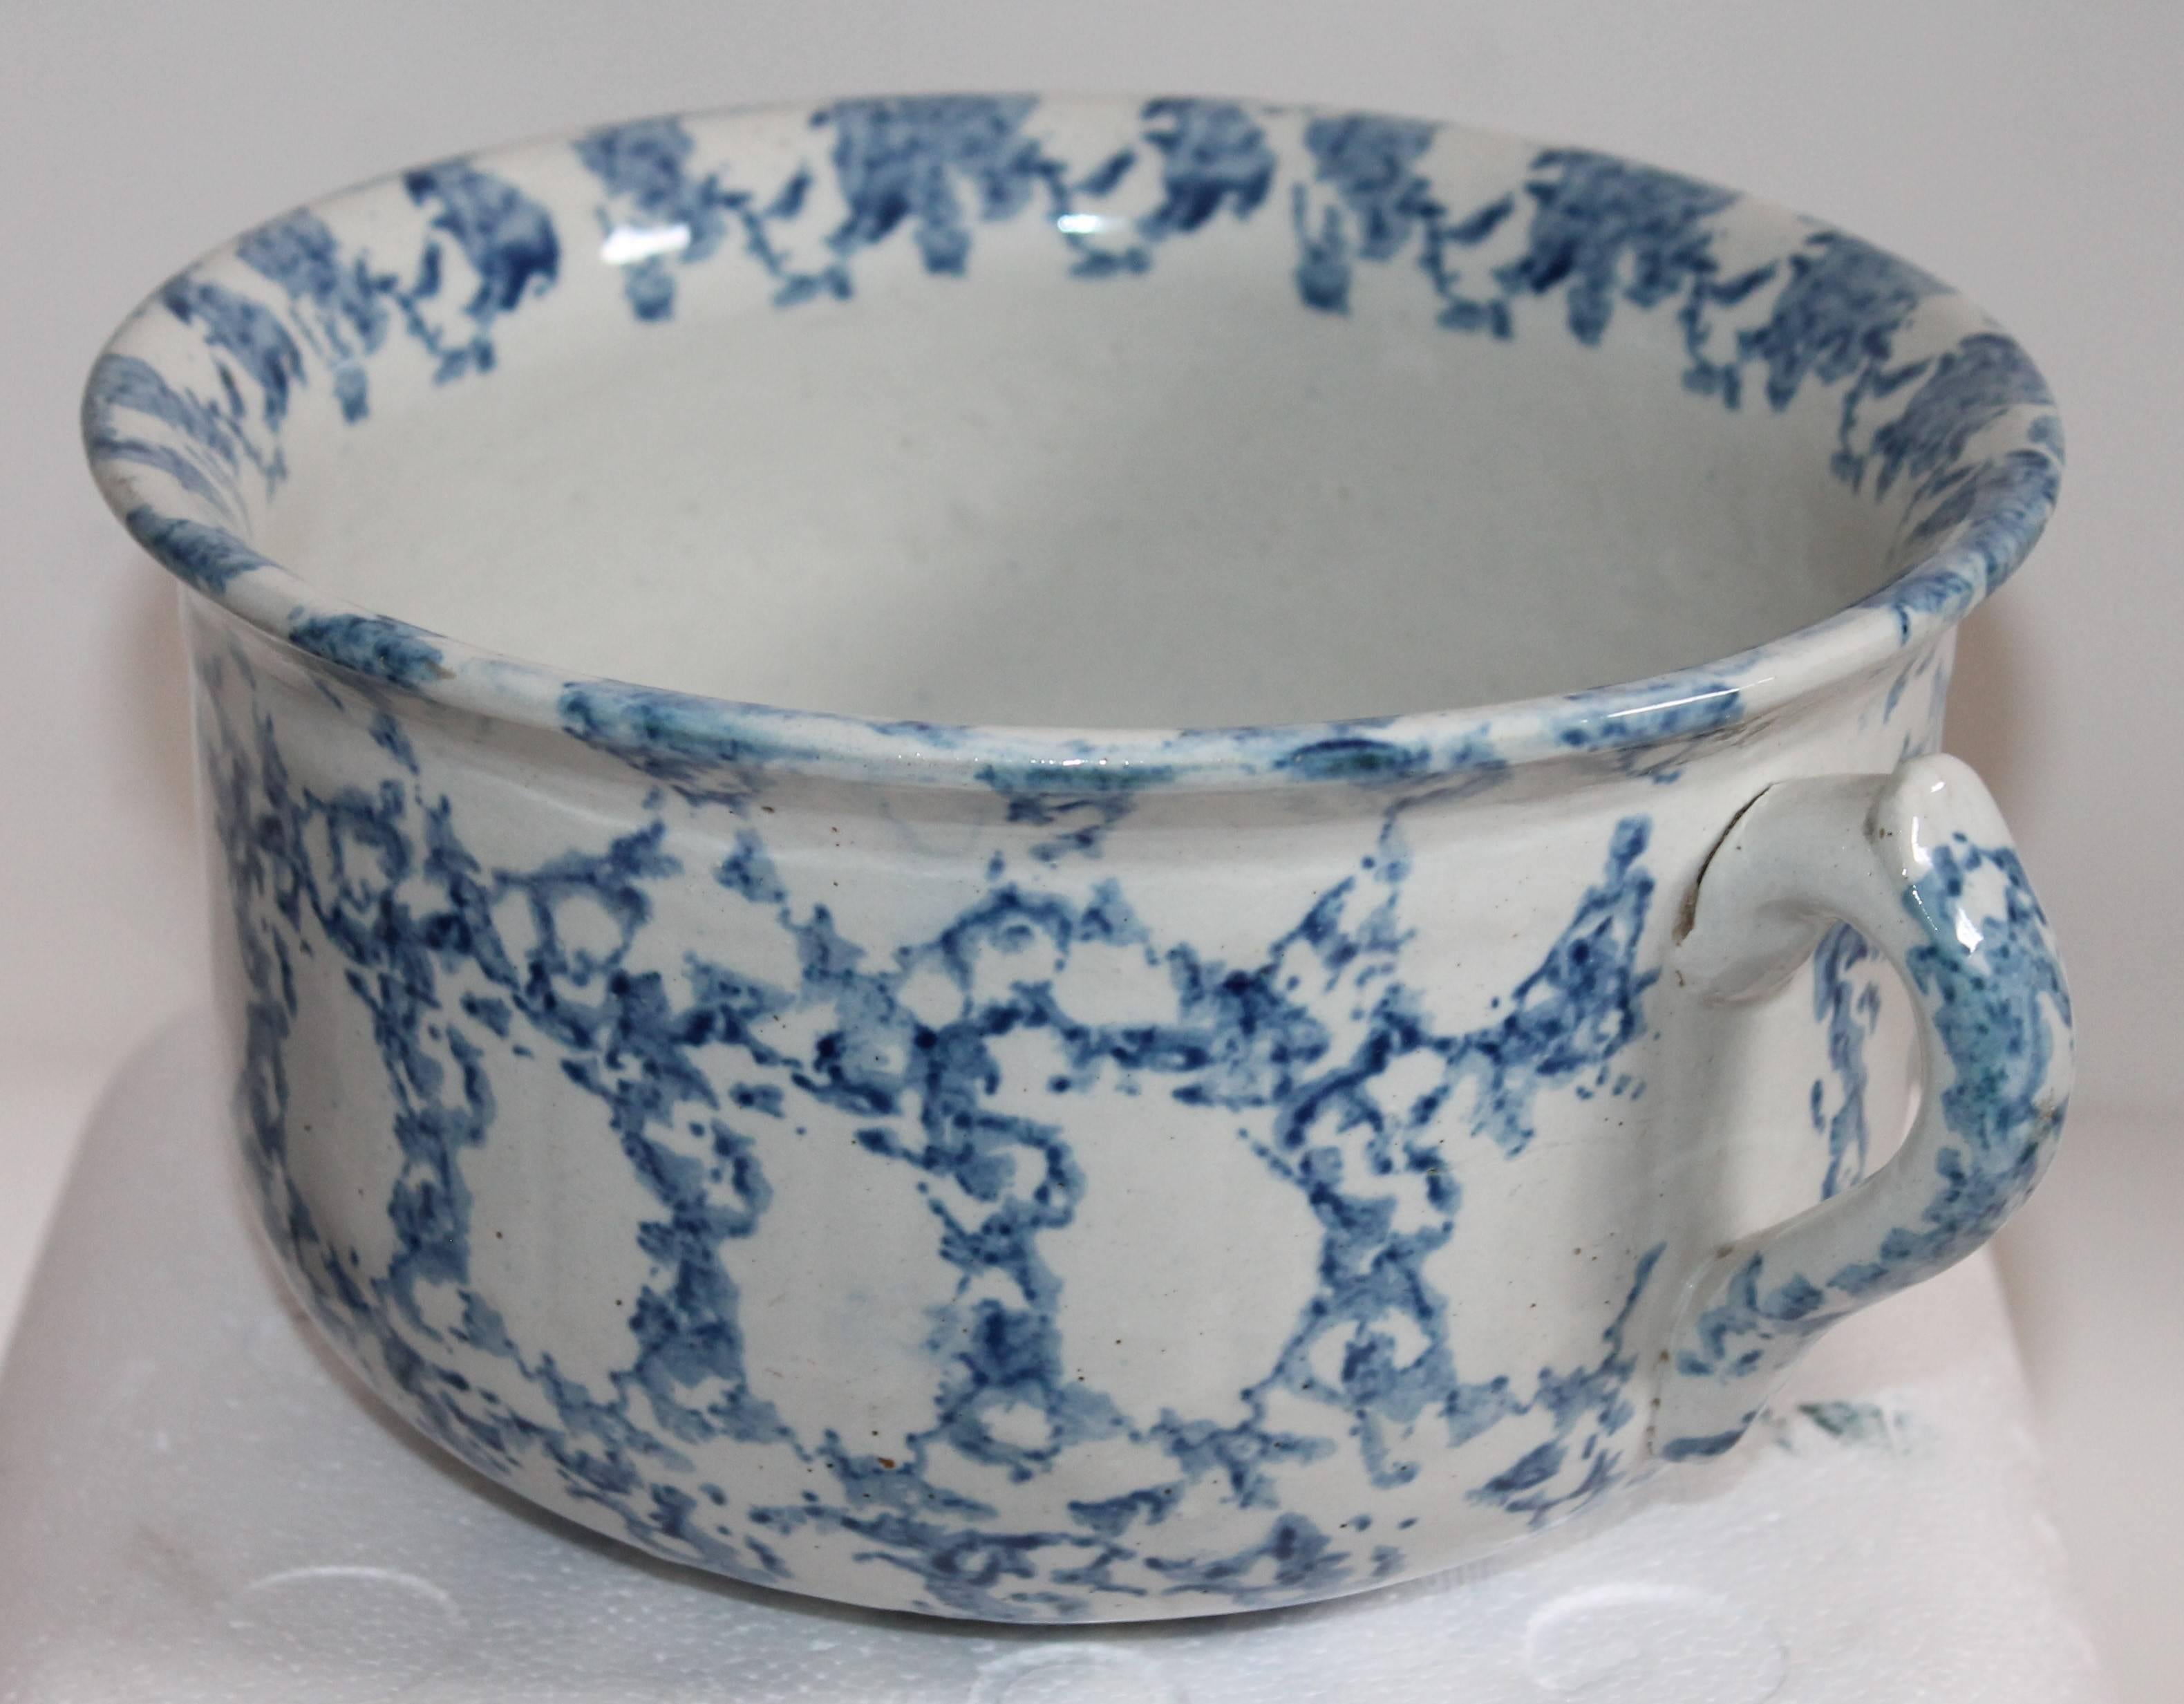 This 19th century sponge ware mottled pottery potty with handle. This is in great condition.